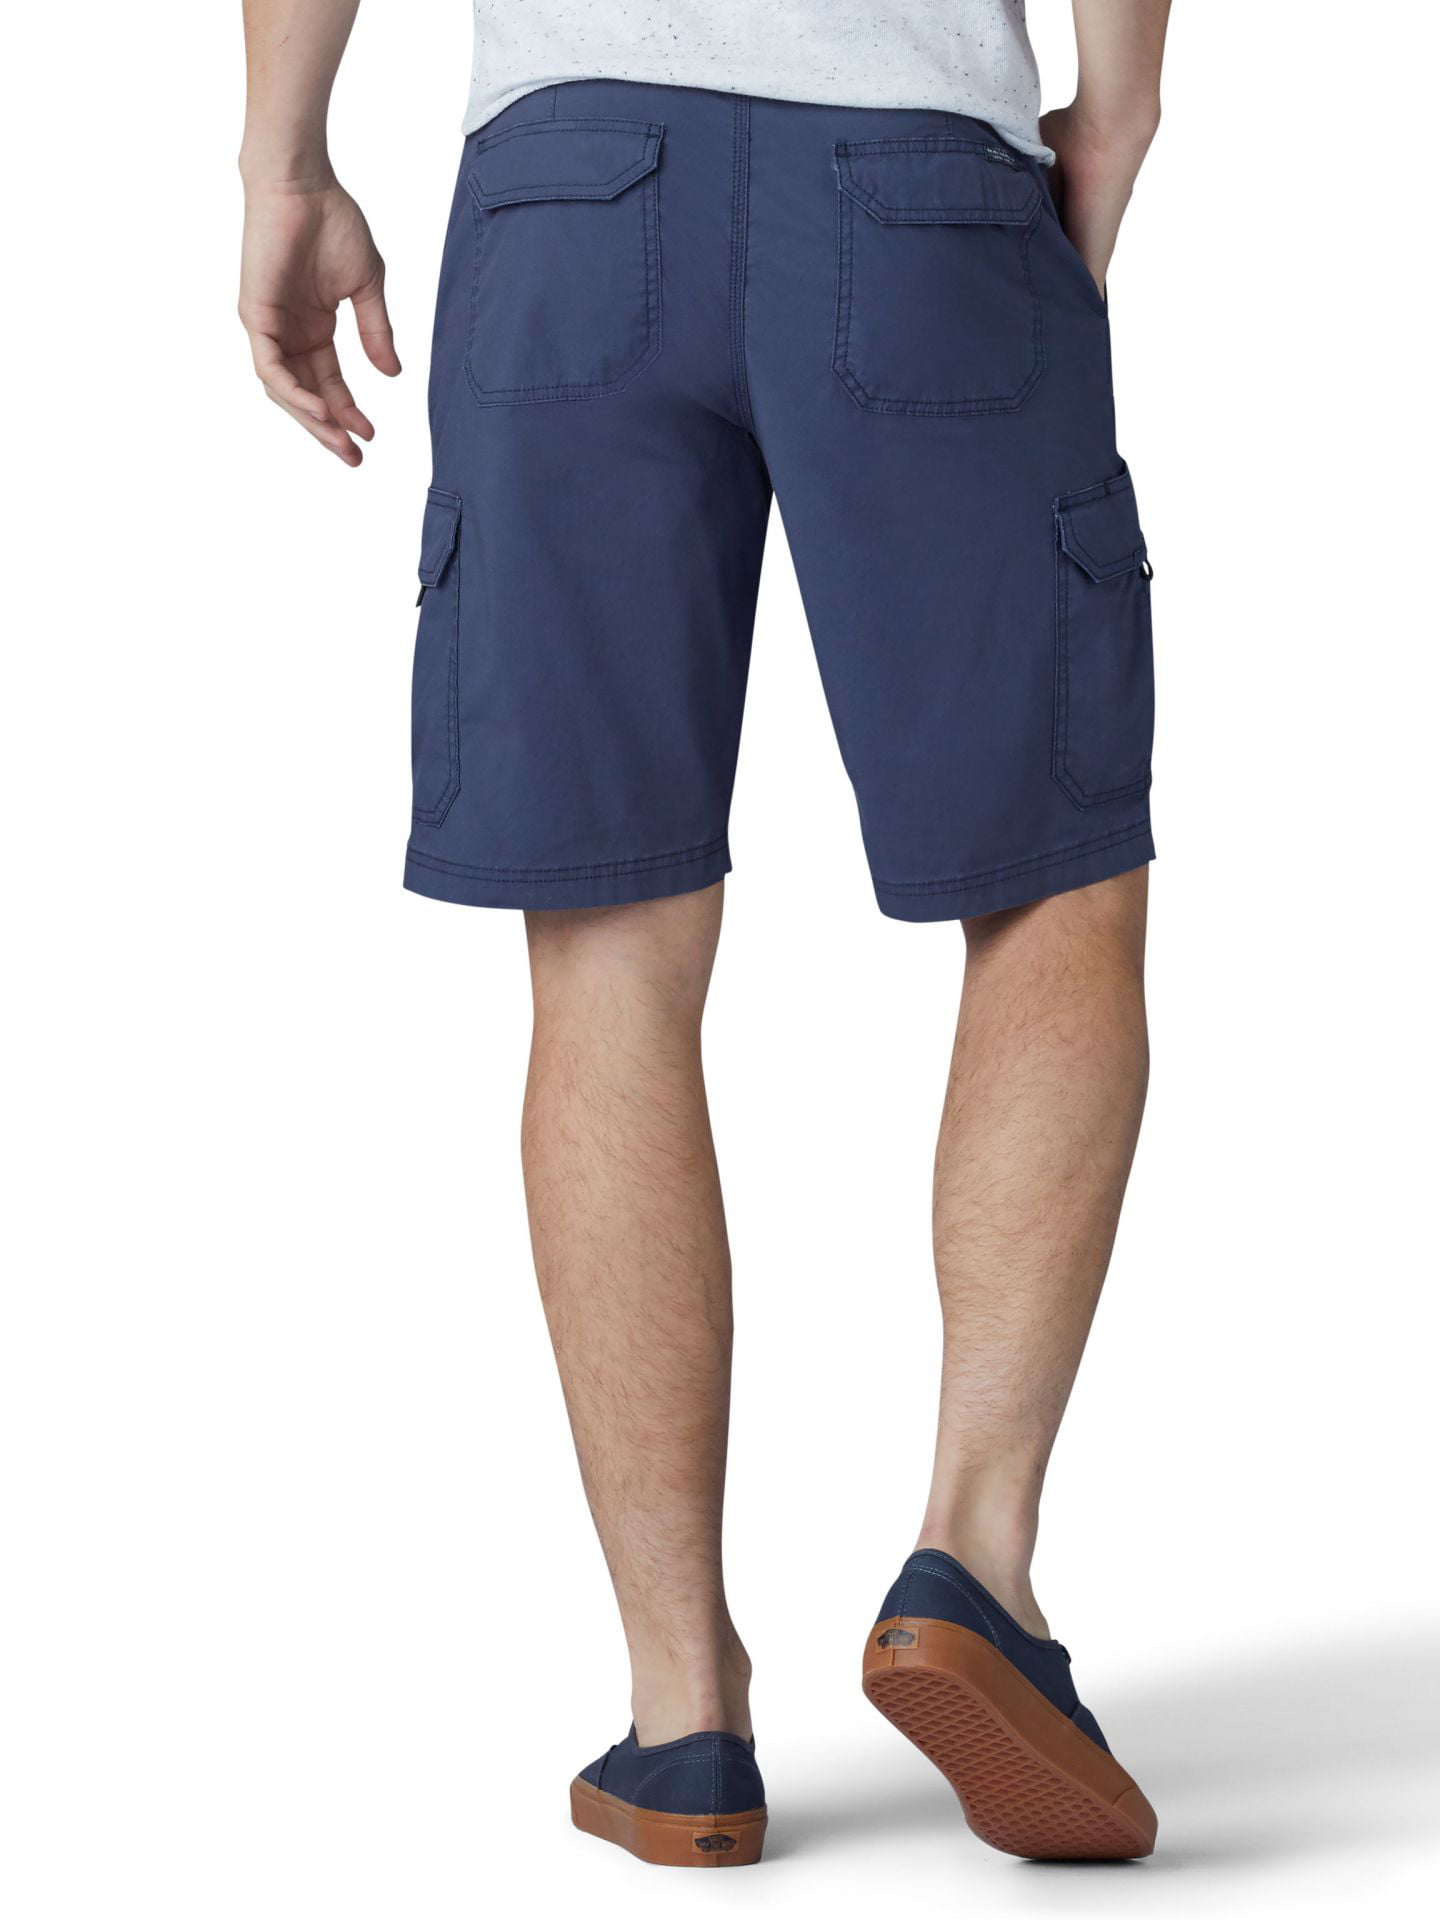 Lee Men's Extreme Motion Crossroad Cargo Shorts - Sporting, Sporting, 34 -  